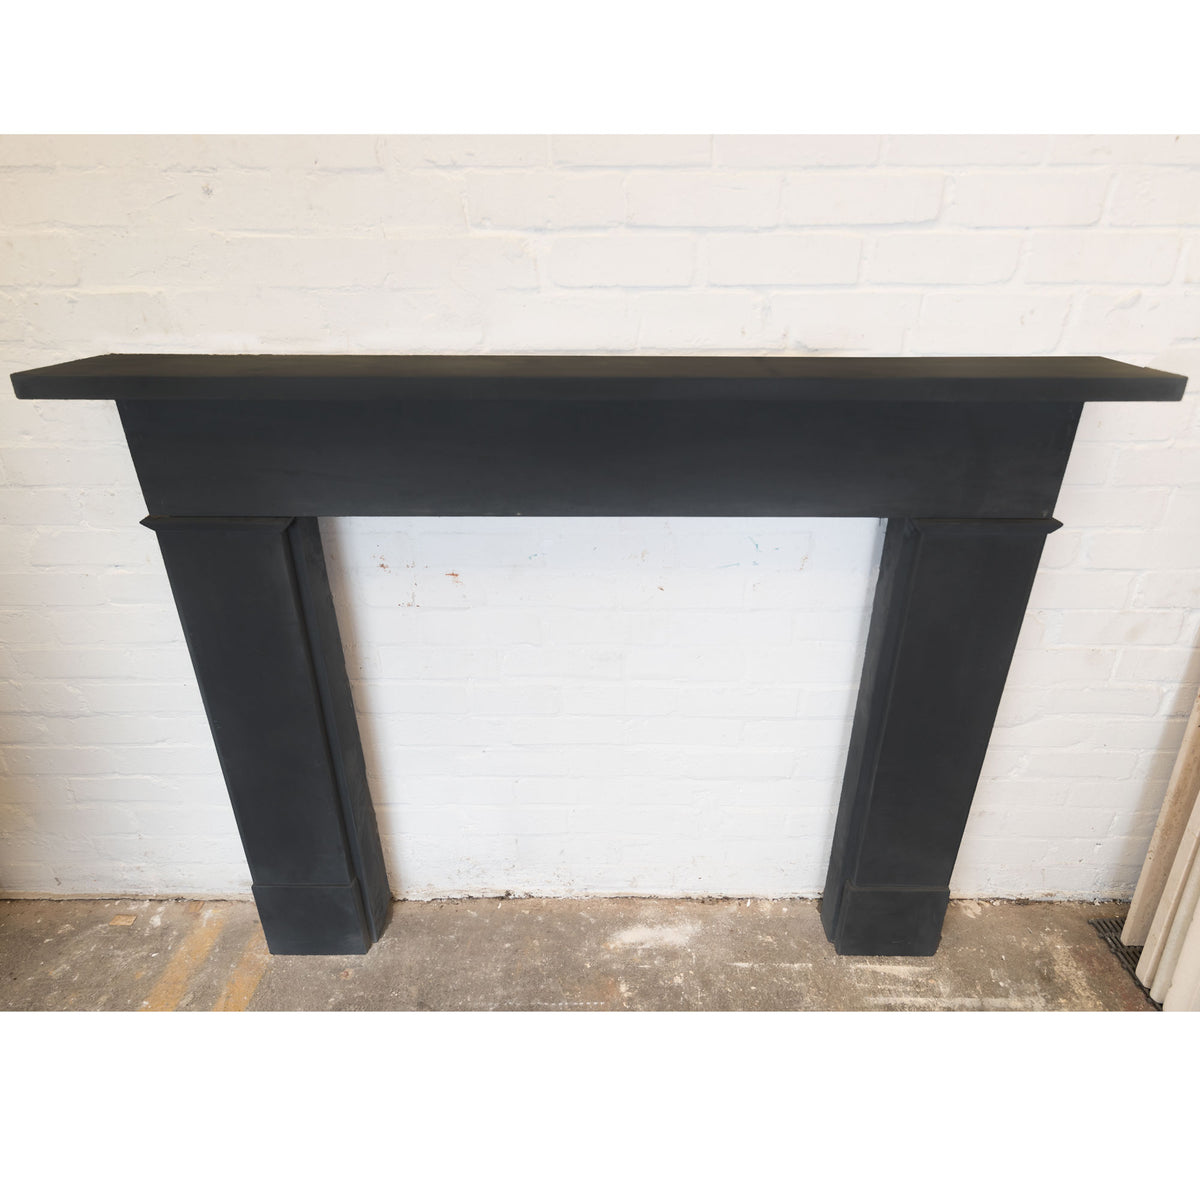 Late Georgian/Victorian Style Black Slate Fireplace Surround | The Architectural Forum